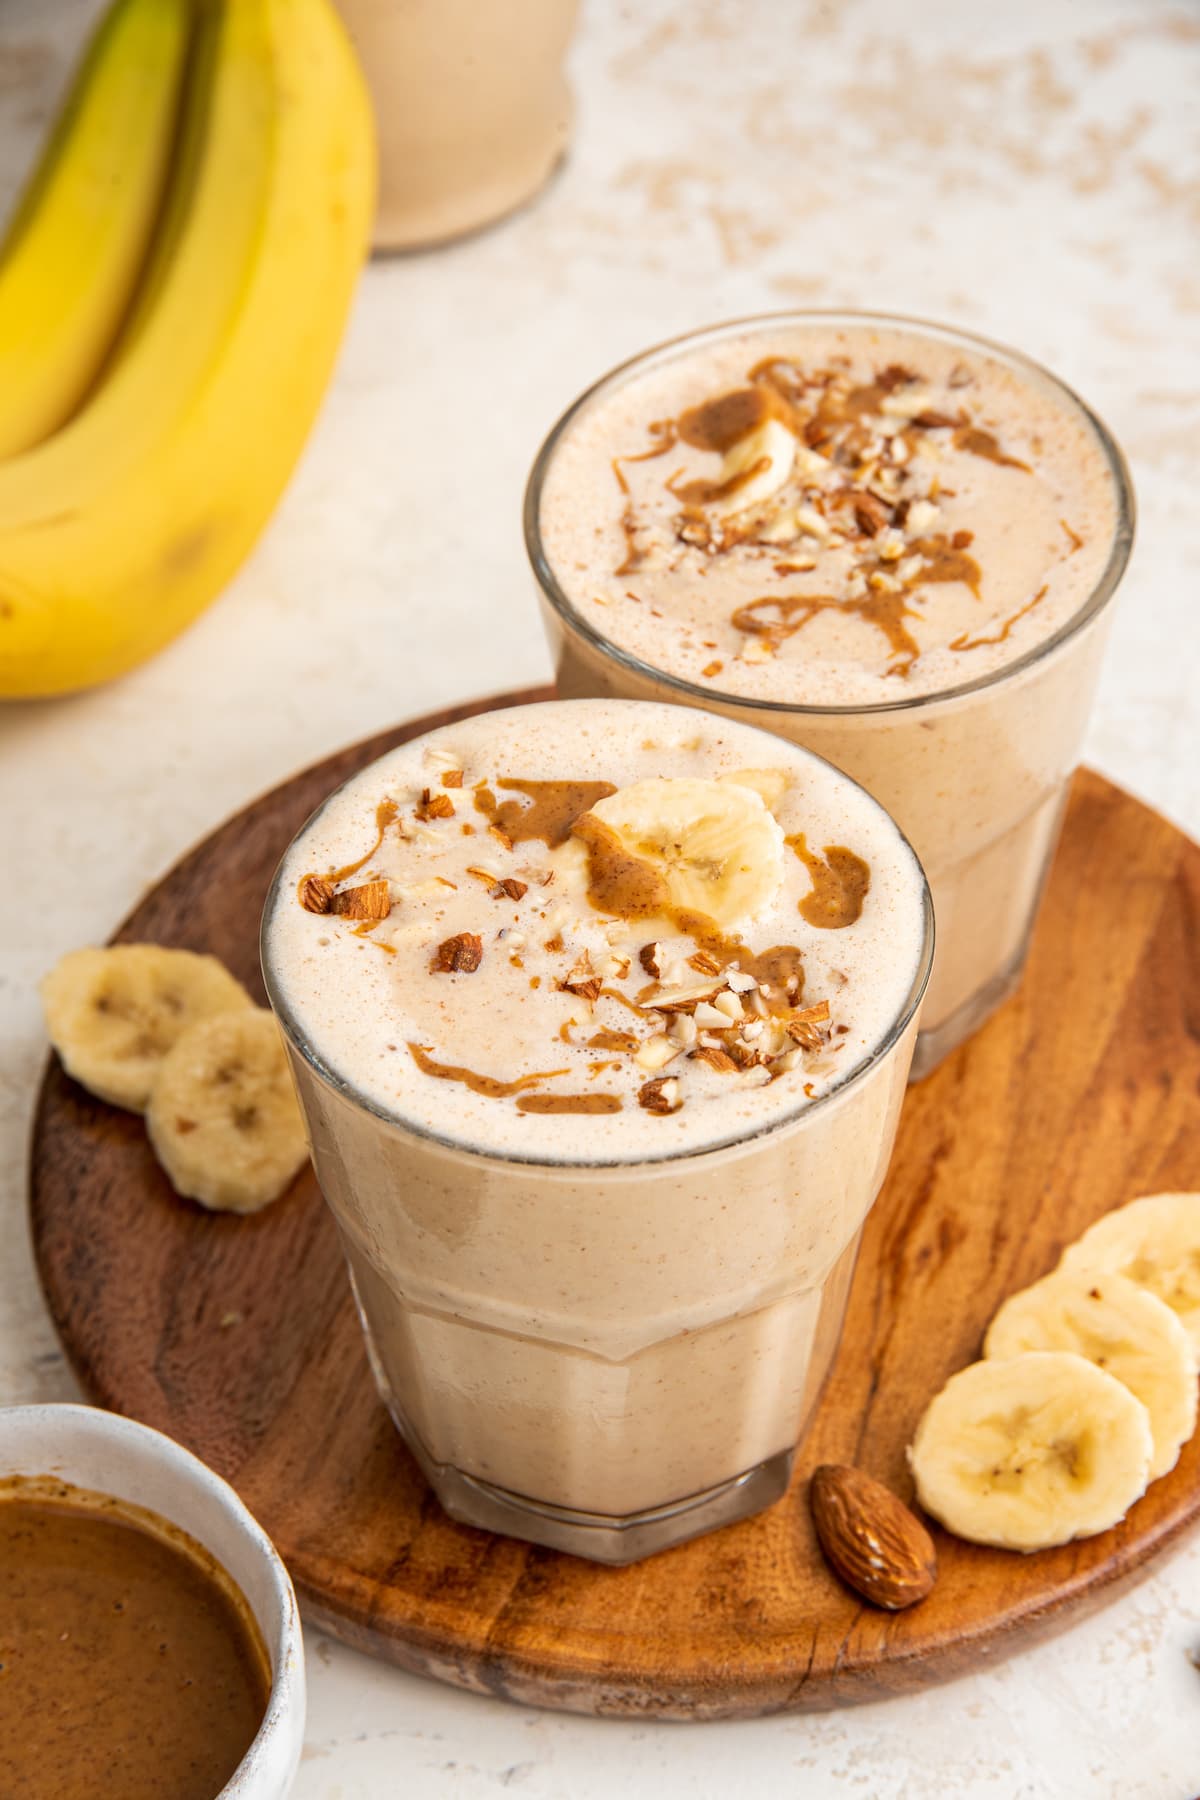 Two banana almond butter smoothies angled on a wooden board.